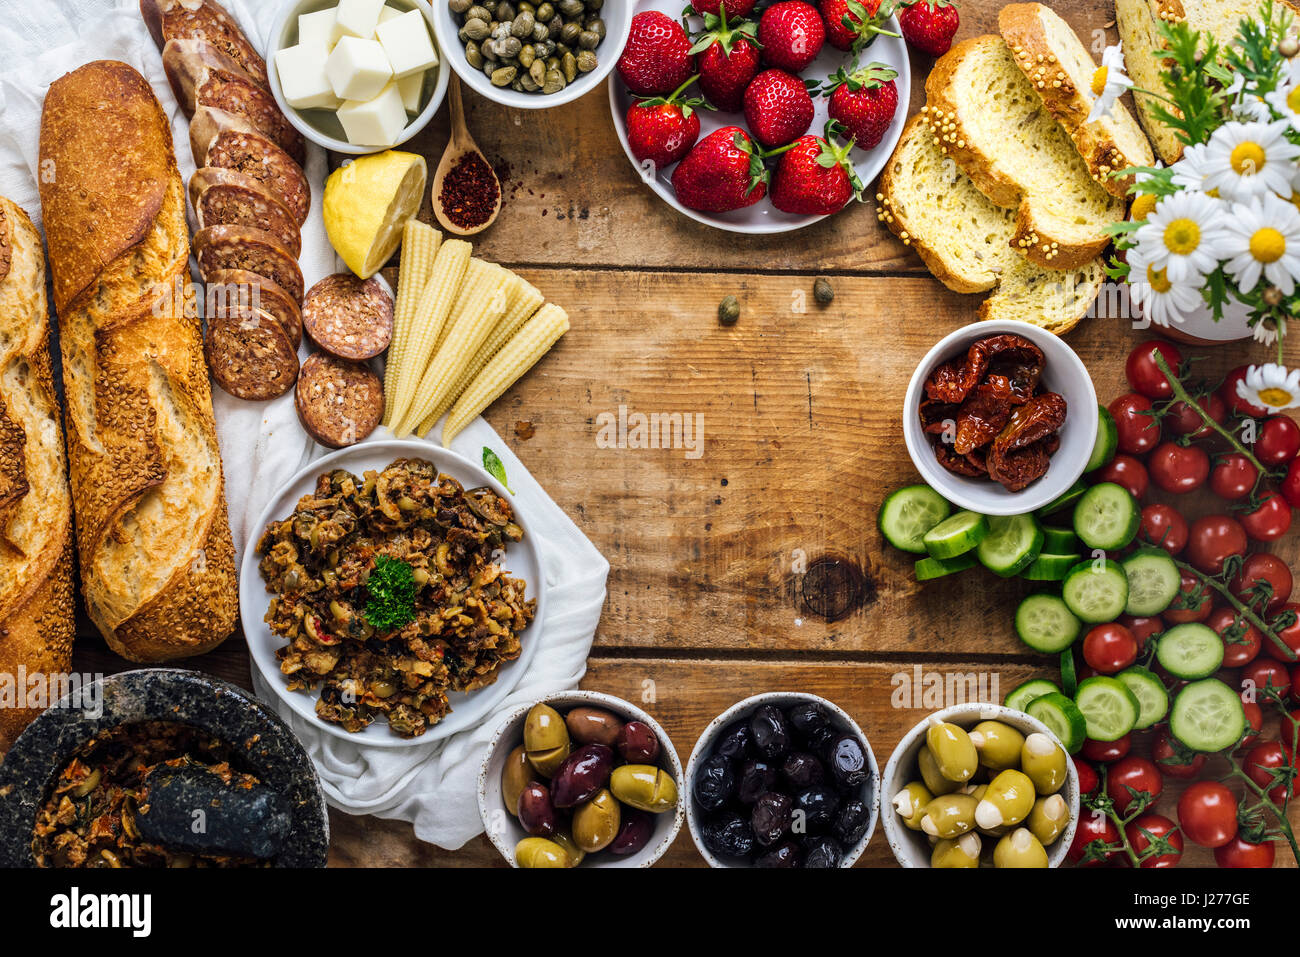 Olive tapenade, sausages, baby corns, french baguette, cheese, capers, strawberries, corn bread slices, sun-dried tomatoes, cherry tomatoes and cucumb Stock Photo